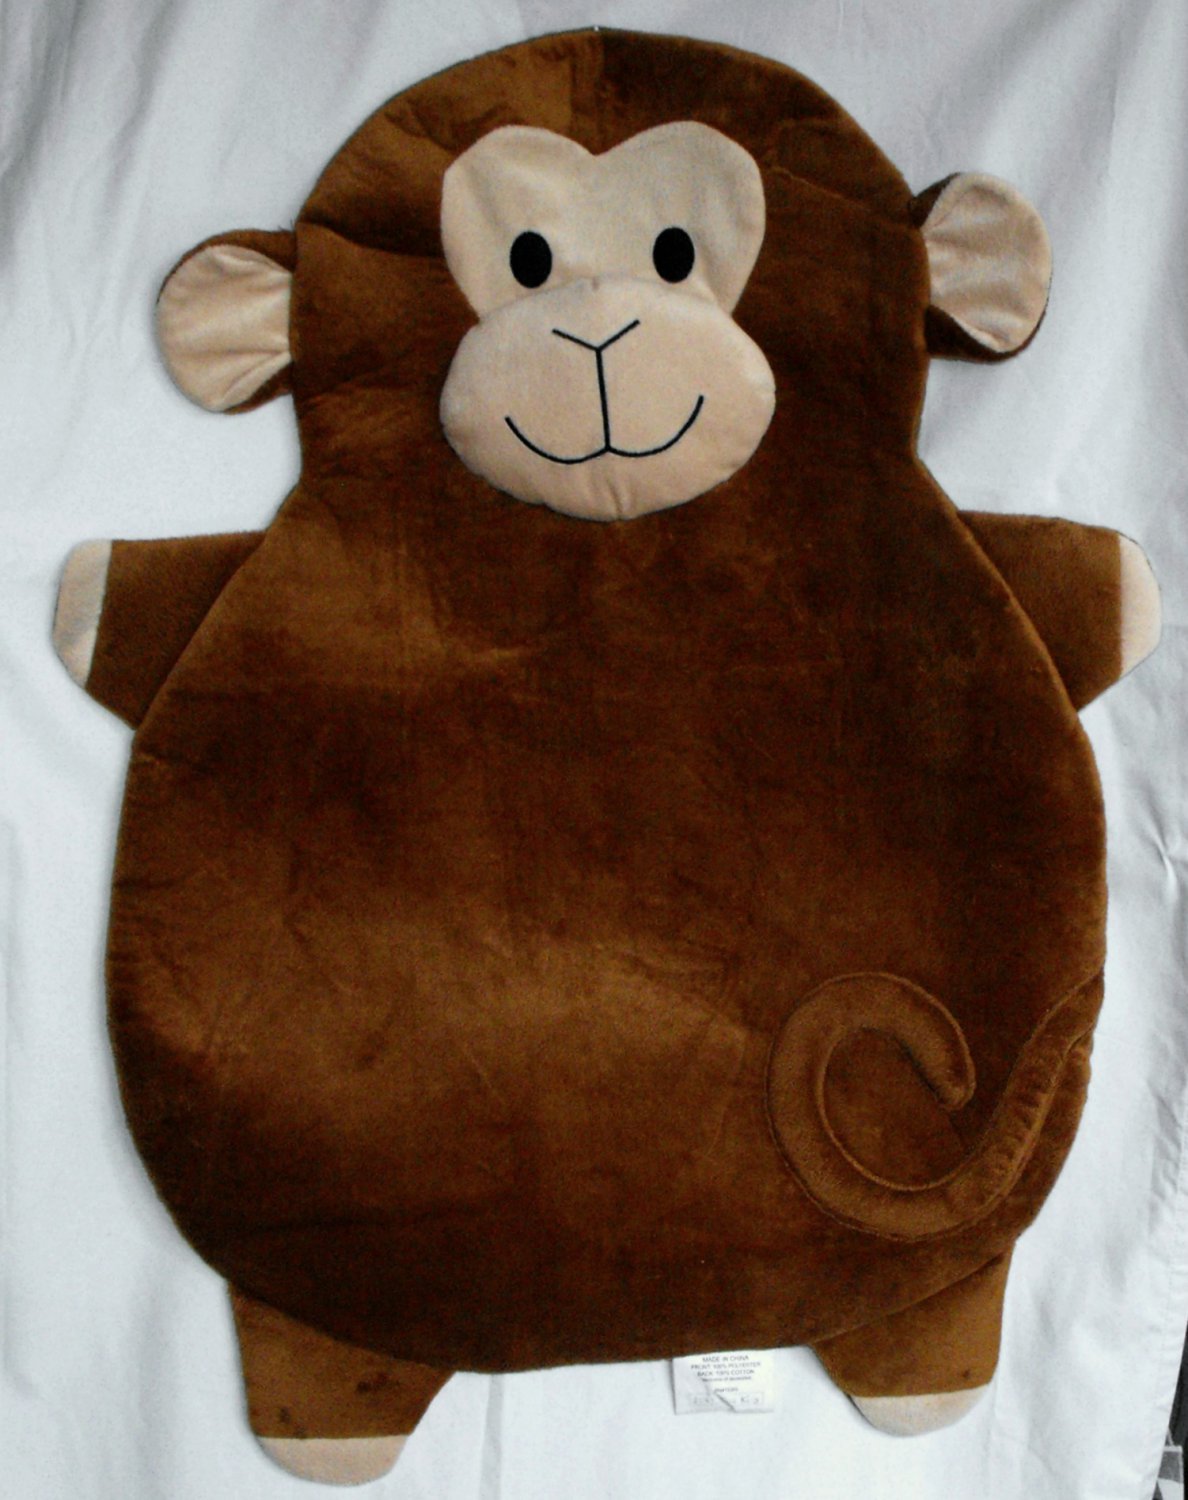 Monkey Plush Play Mat Just For Kids by Jay Franco